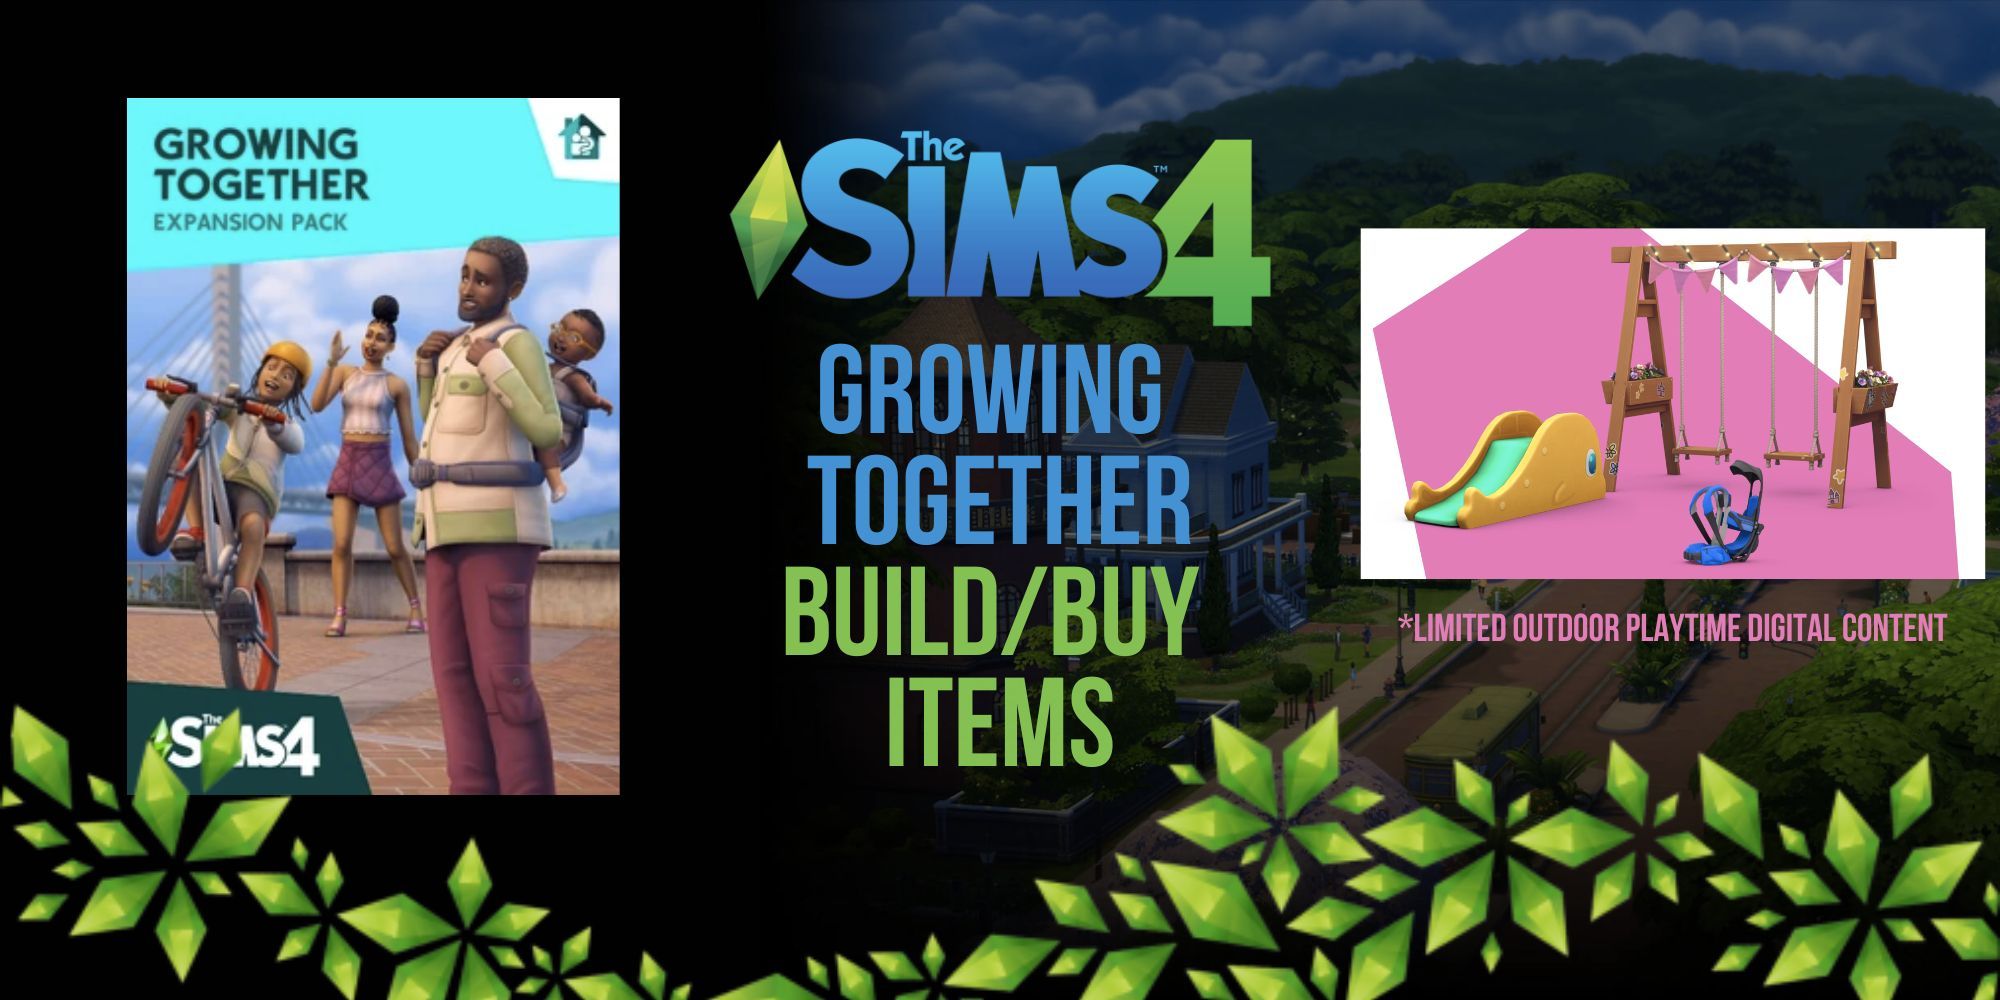 The Sims 4 Growing Together Build_Buy Items